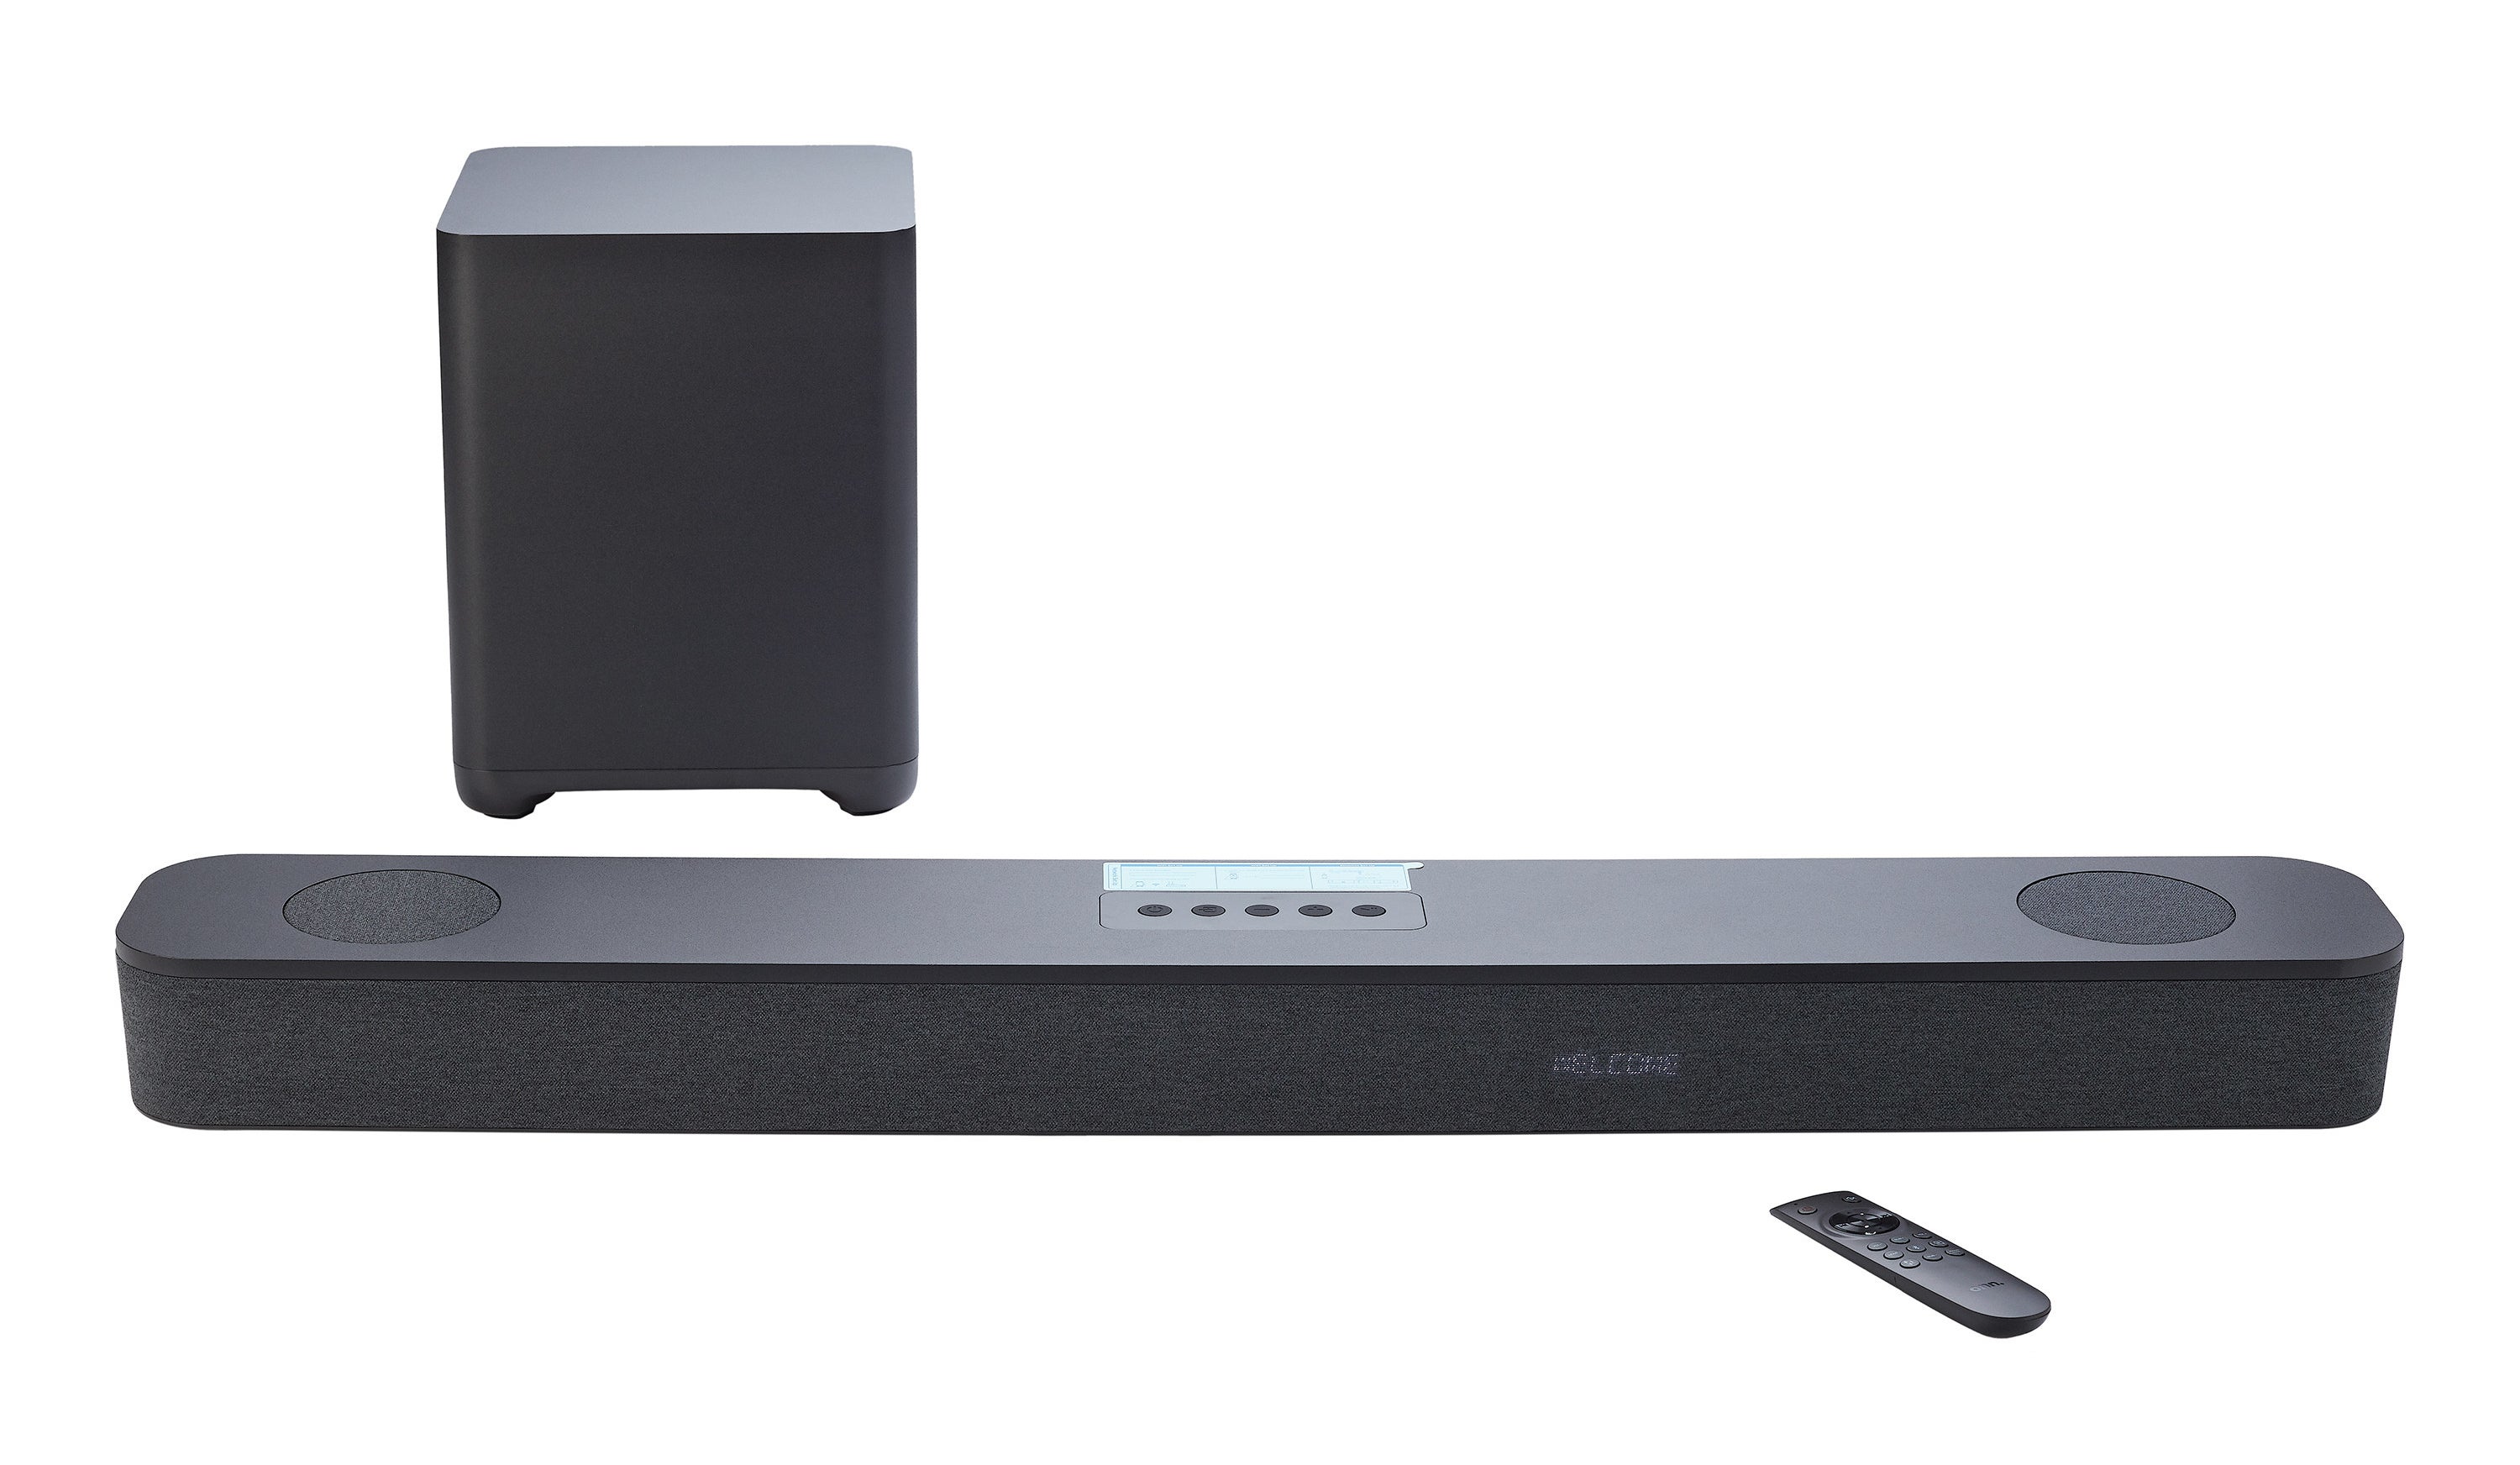 the sound bar and subwoofer